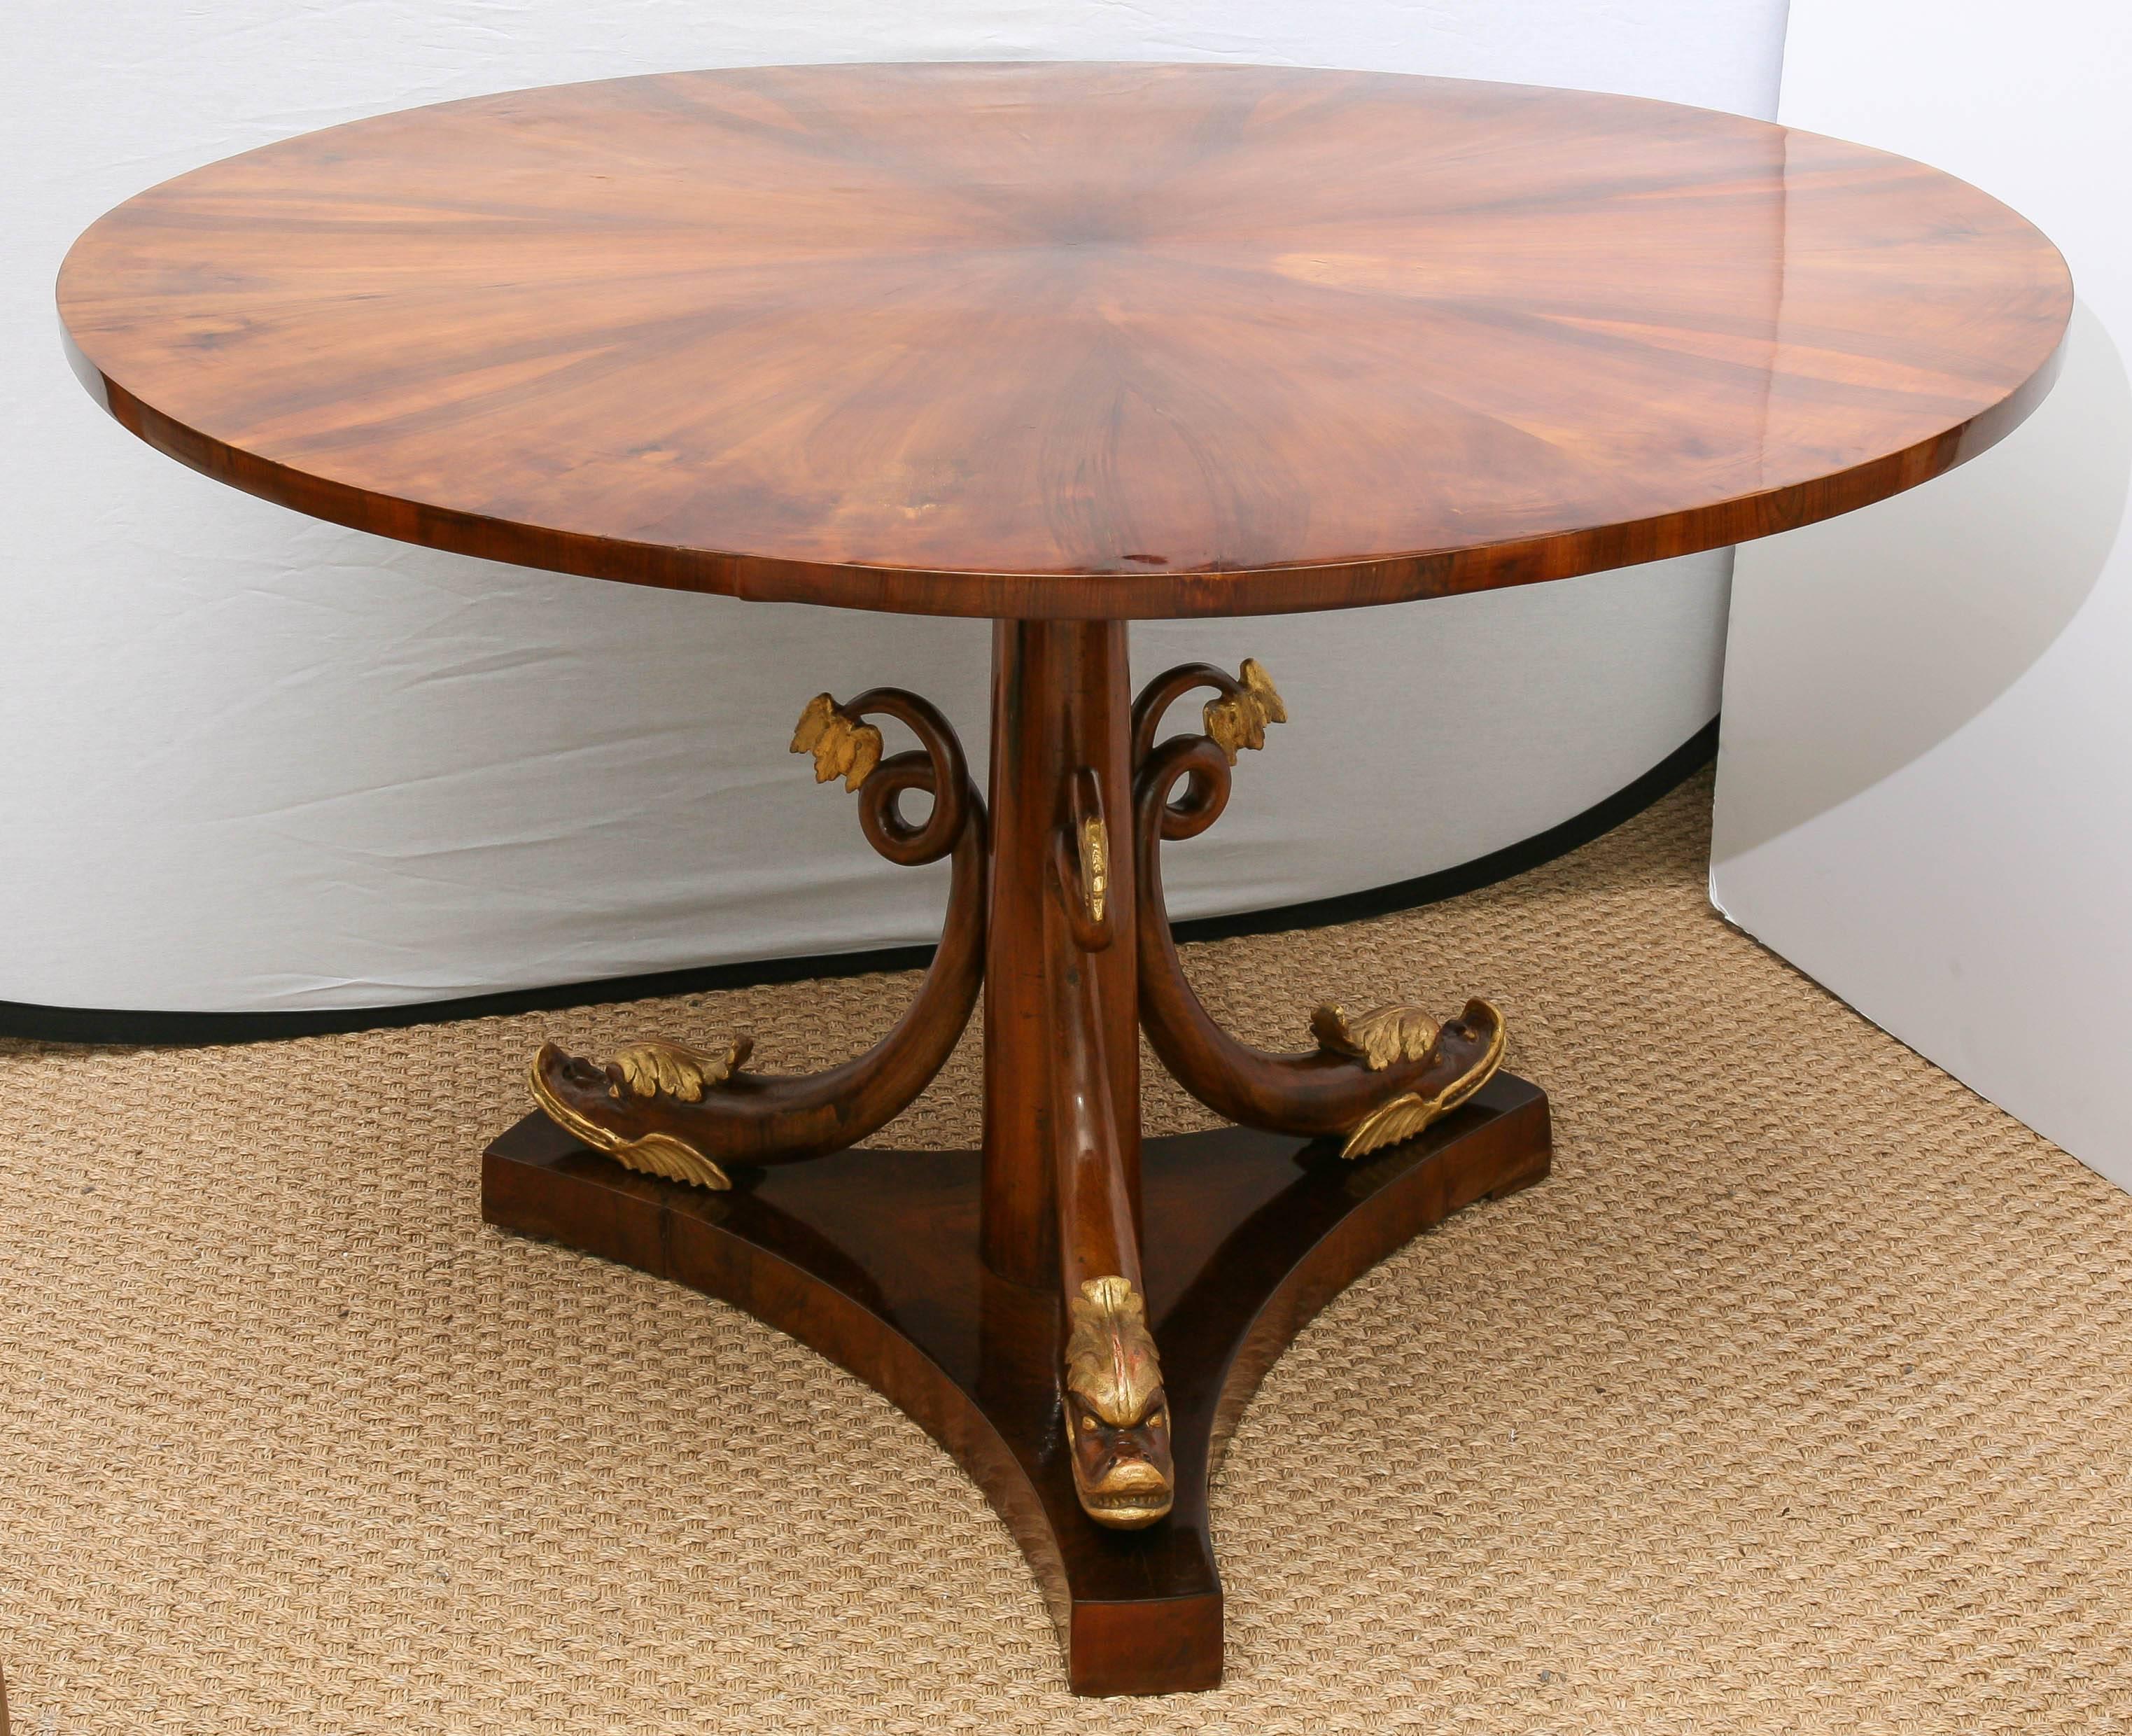 Exceptional Viennese Biedermeier center or dining table with circular flip-top so detailed that even the underside has walnut veneer as masterfully crafted as the top. The carved creatures as the base may be described as snakes or dolphins. They